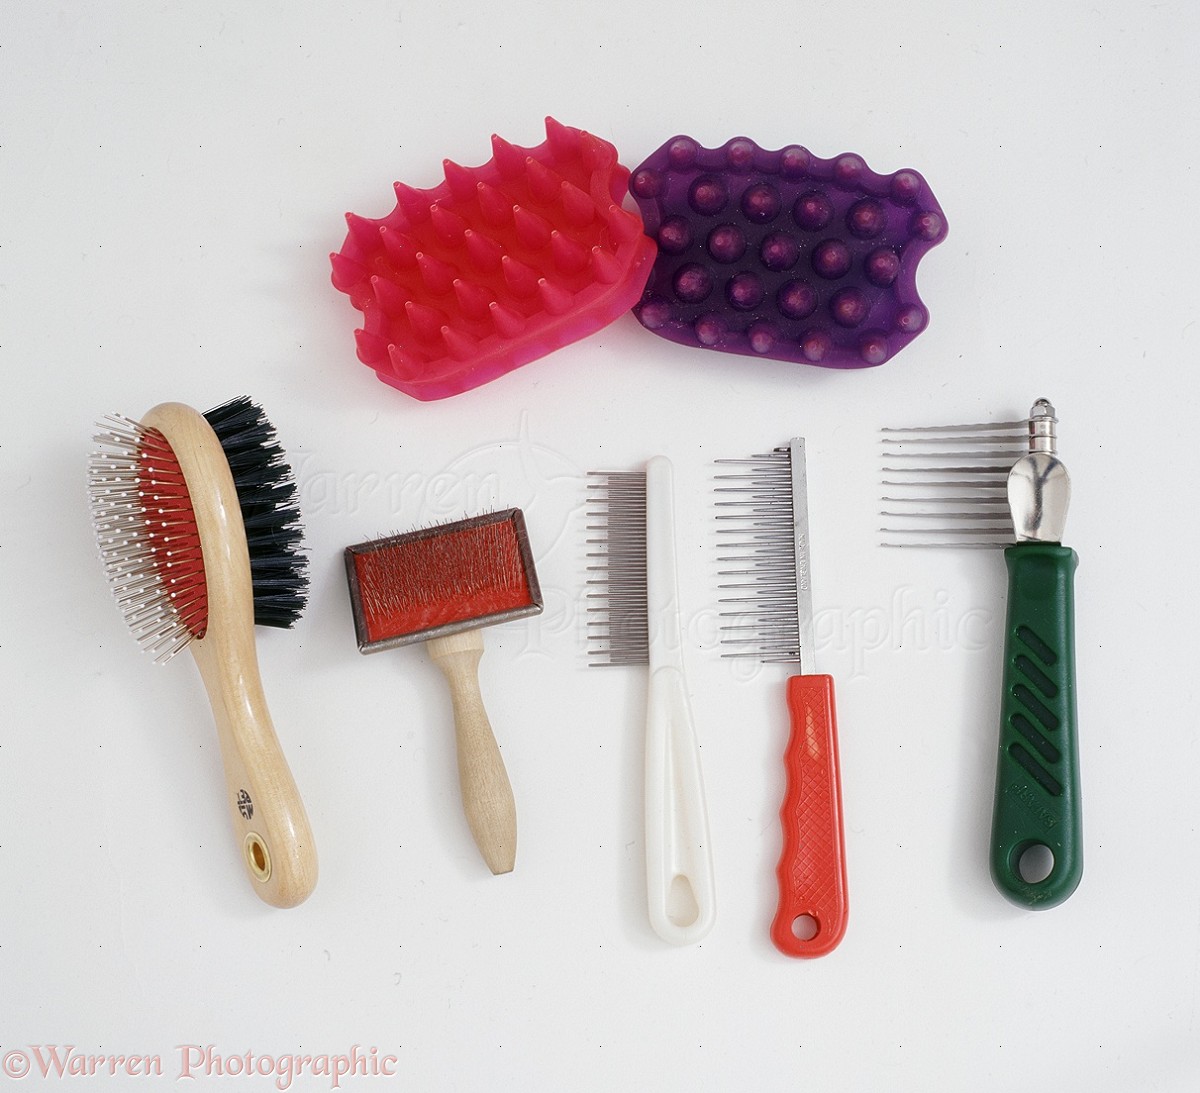 grooming tools for cats